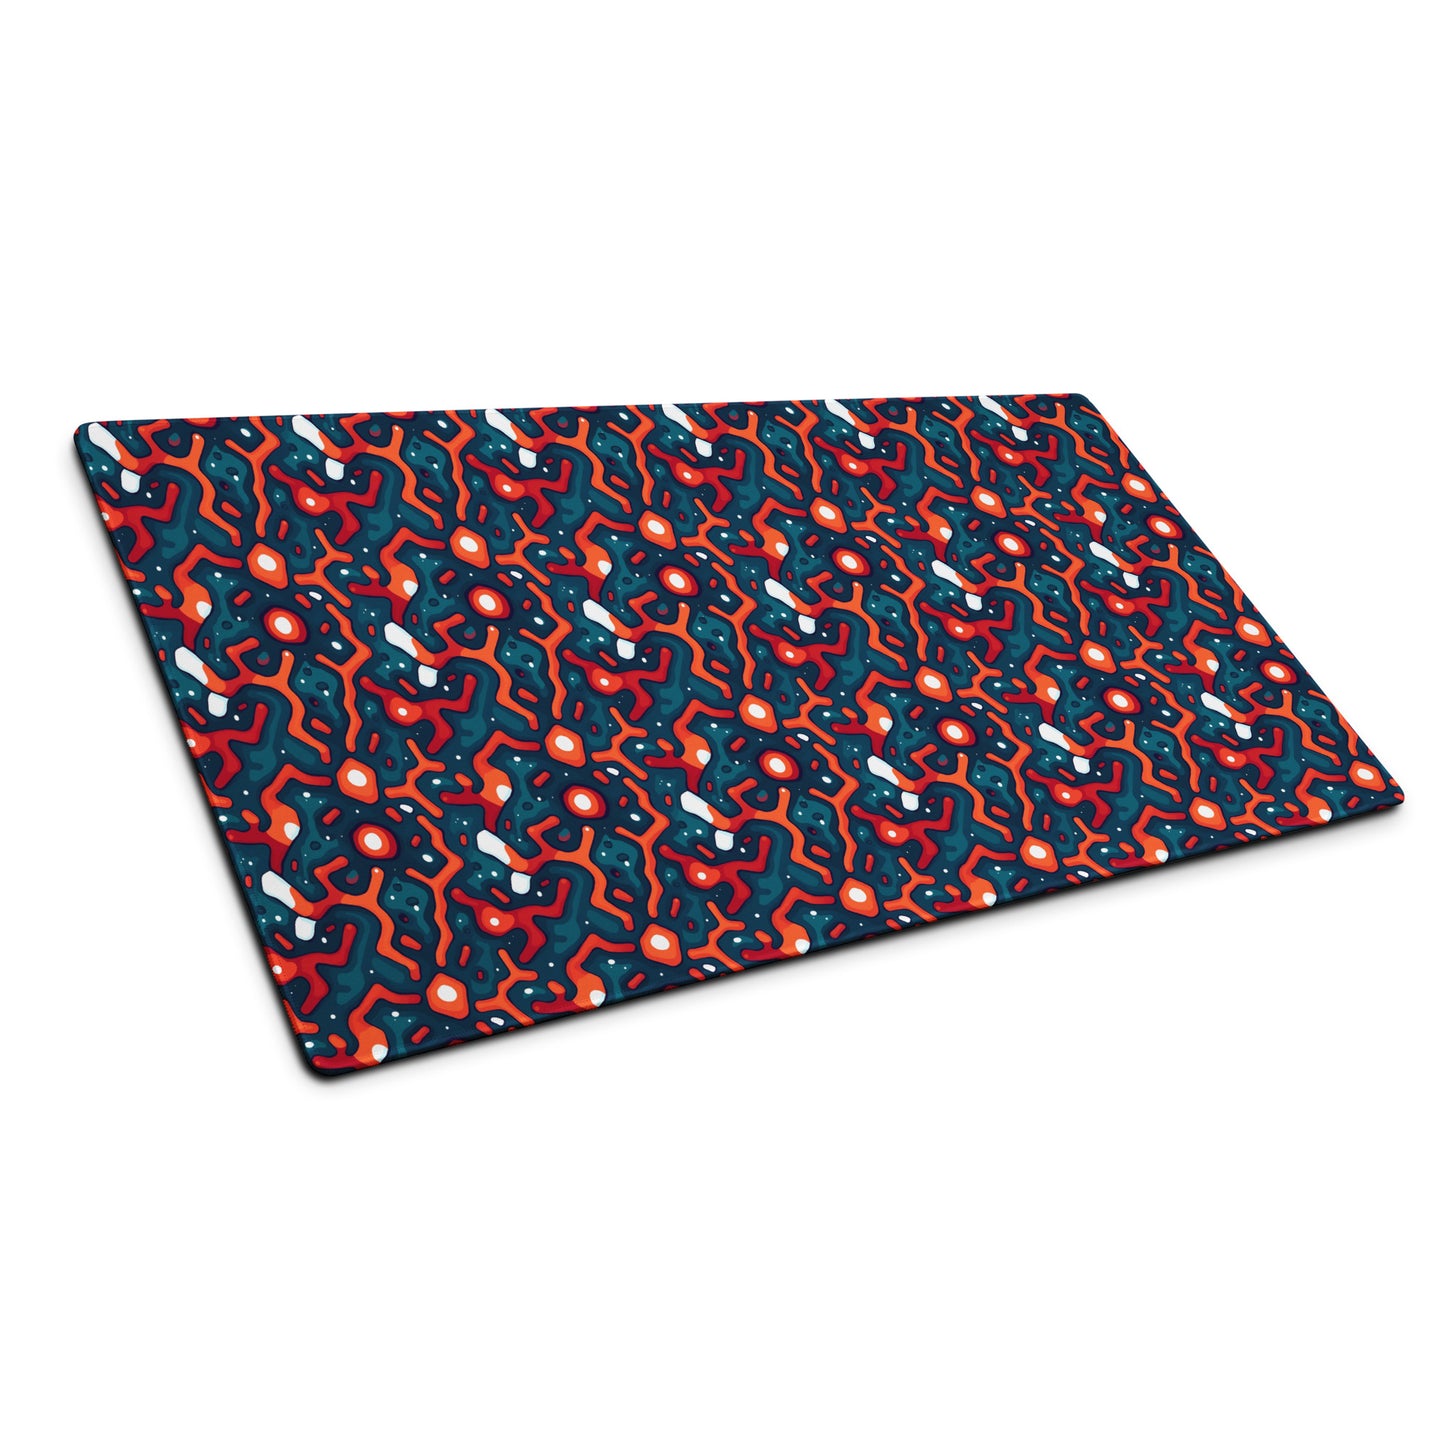 A 36" x 18" desk pad with a blue and orange crack pattern sitting at an angle.